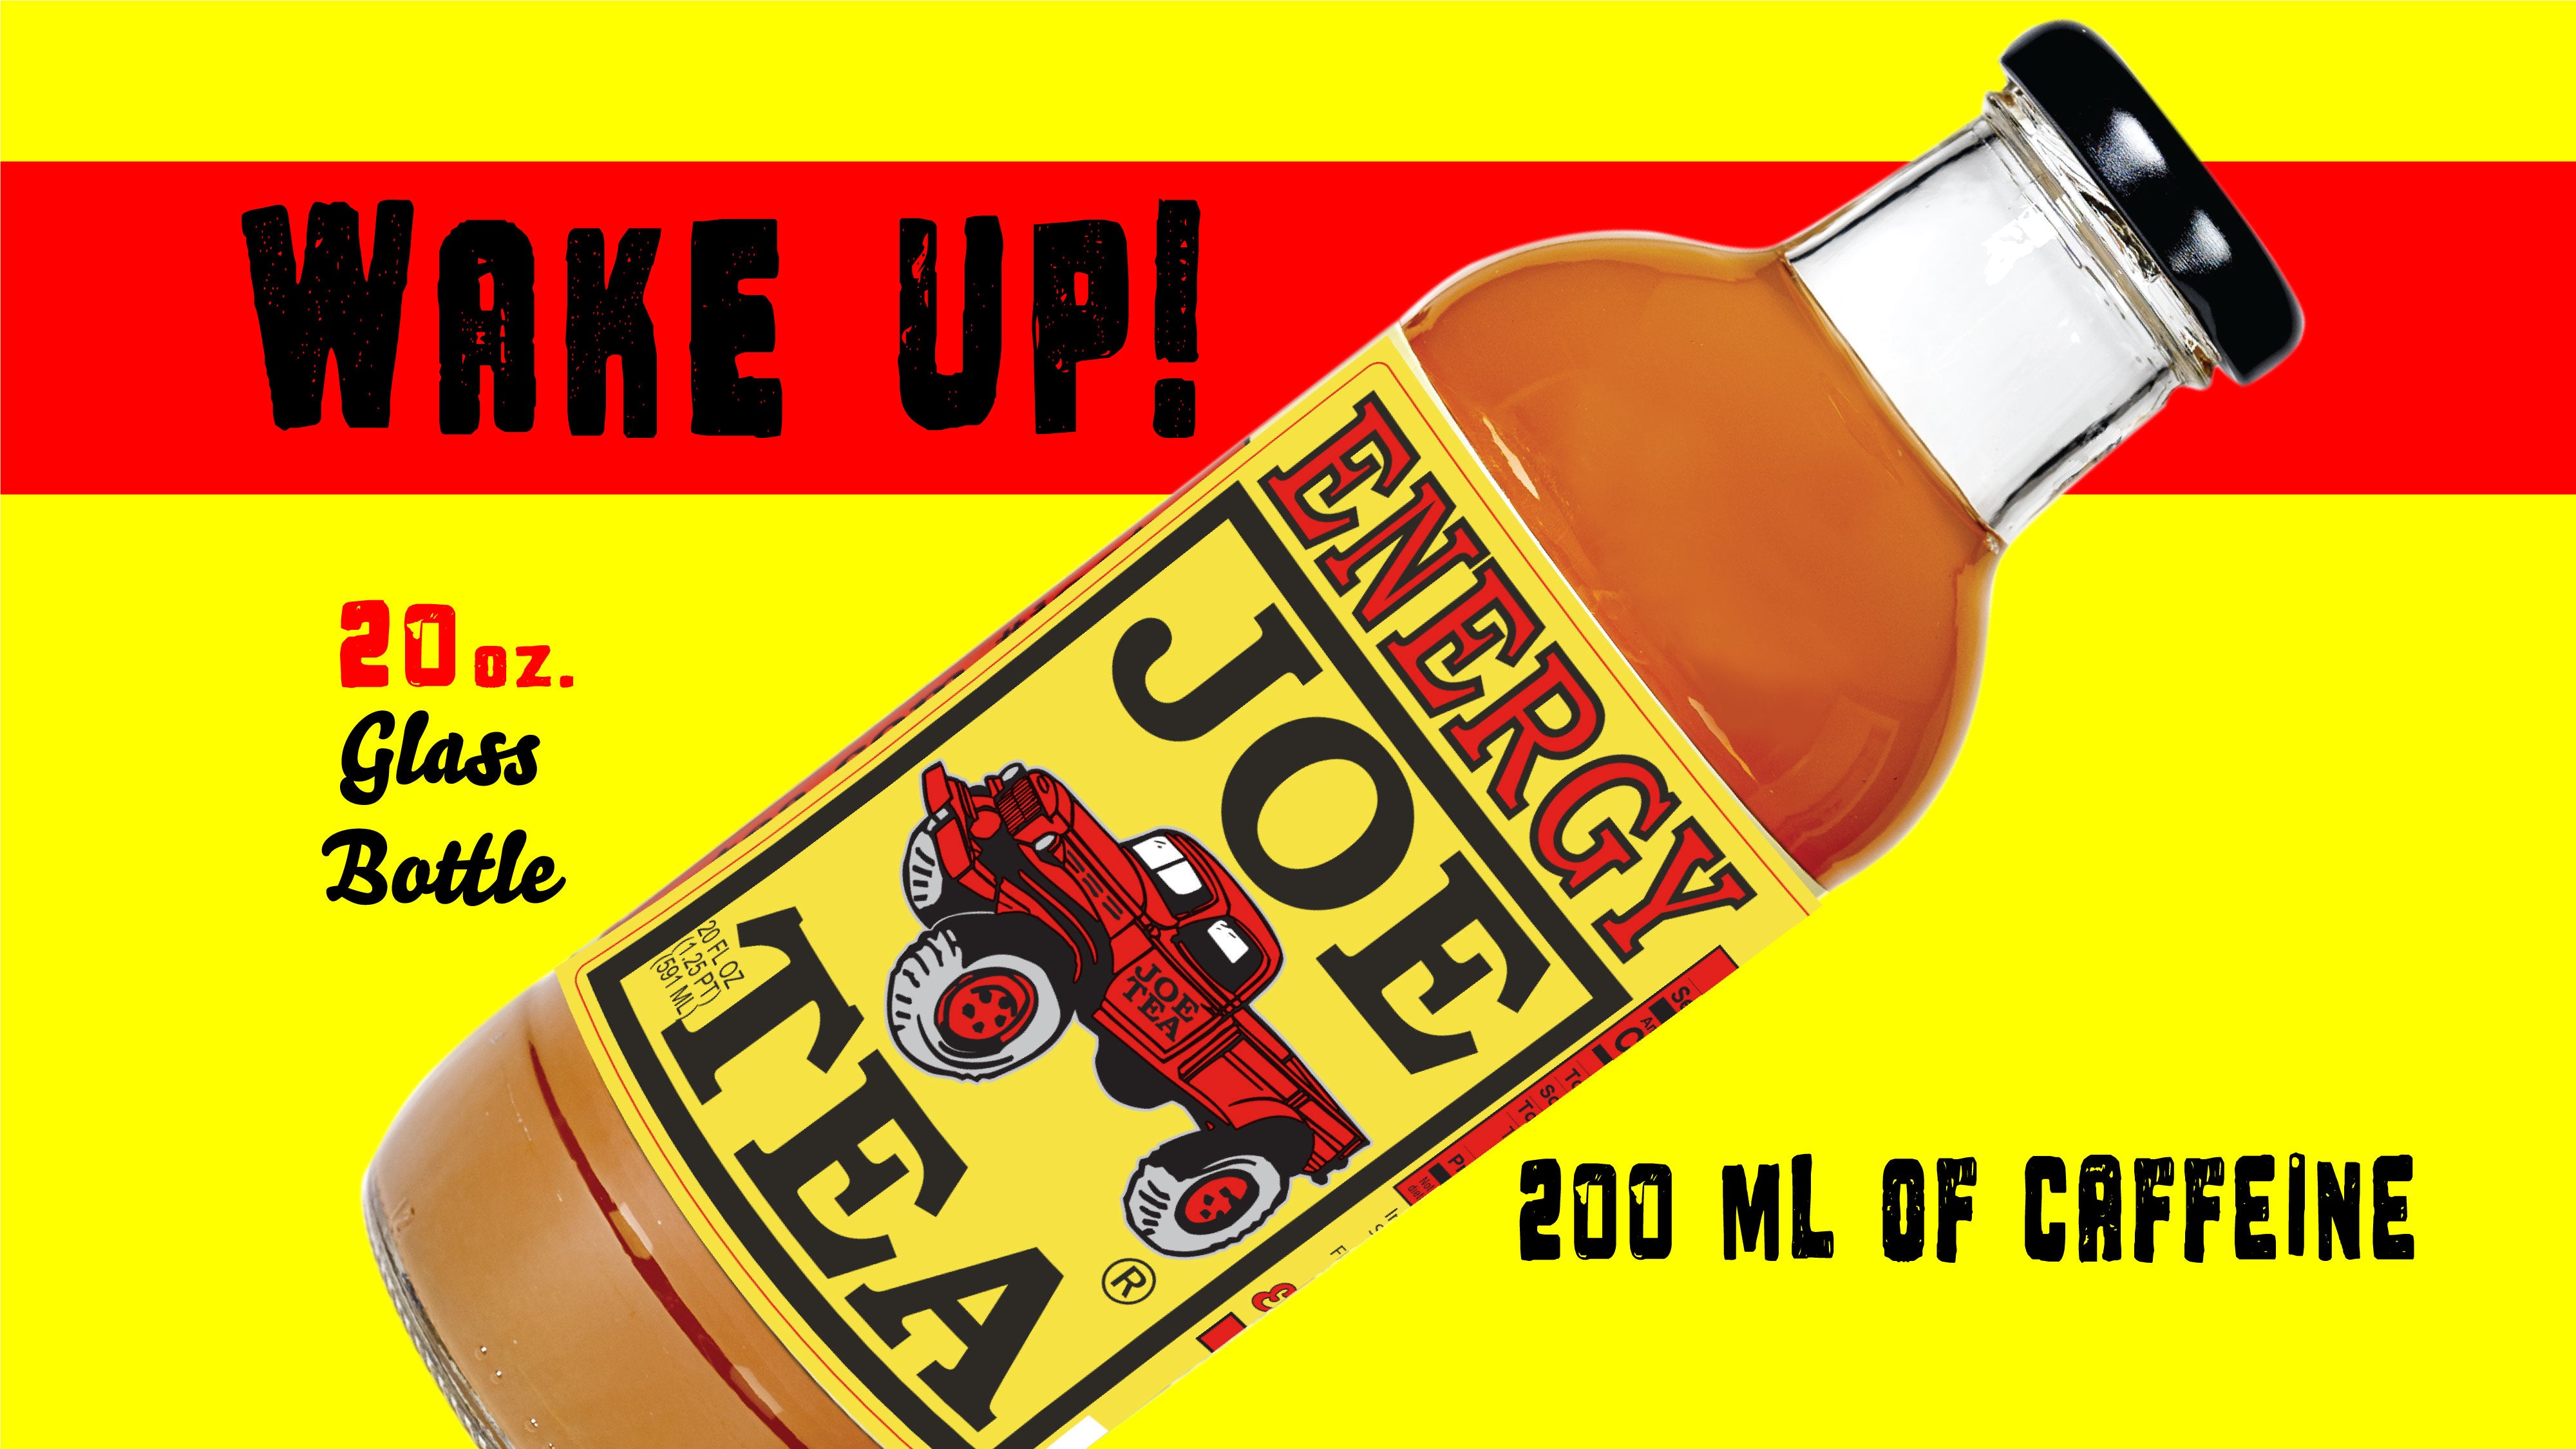 "wake up" to 200 ml of caffeine when you drink Joe Tea Energy in a 20 oz. glass bottle 